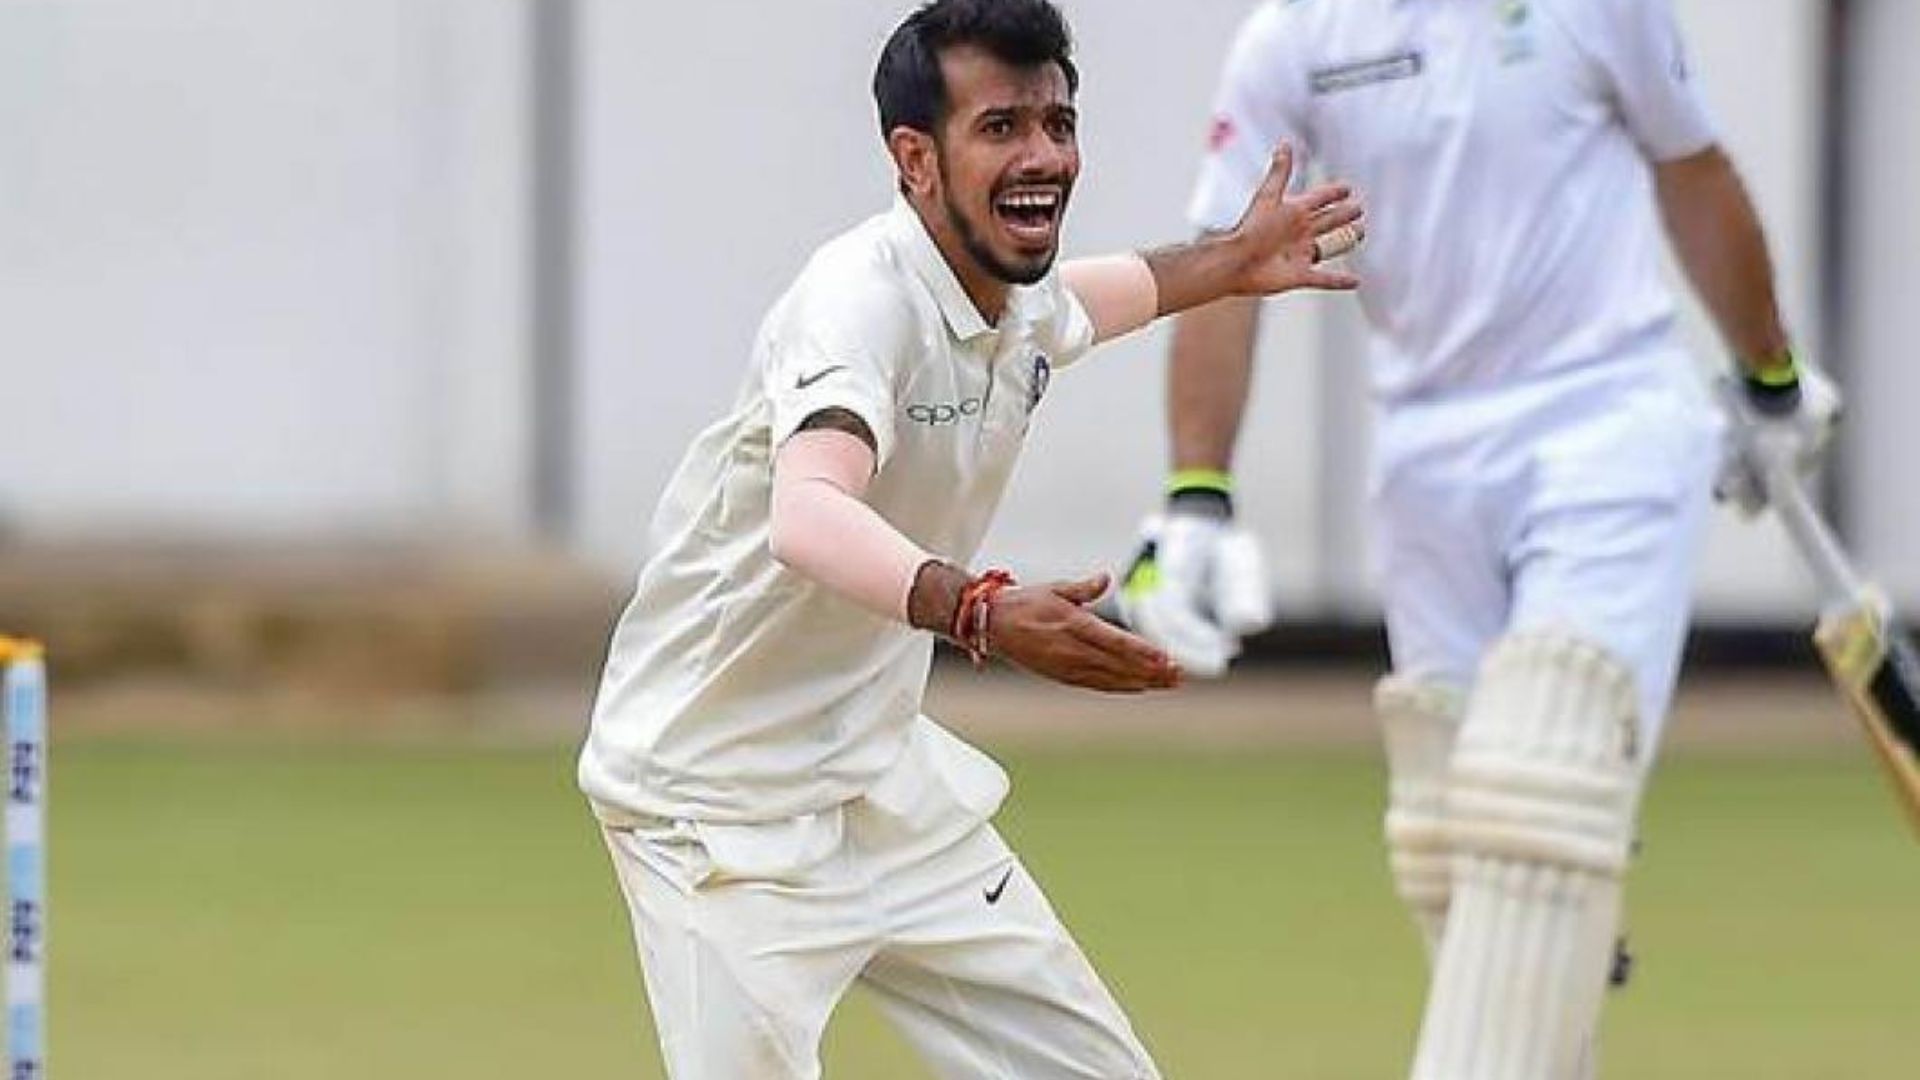 Yuzvendra Chahal feels he needs to go back and play first-class cricket consistently. (P.C.:Getty)